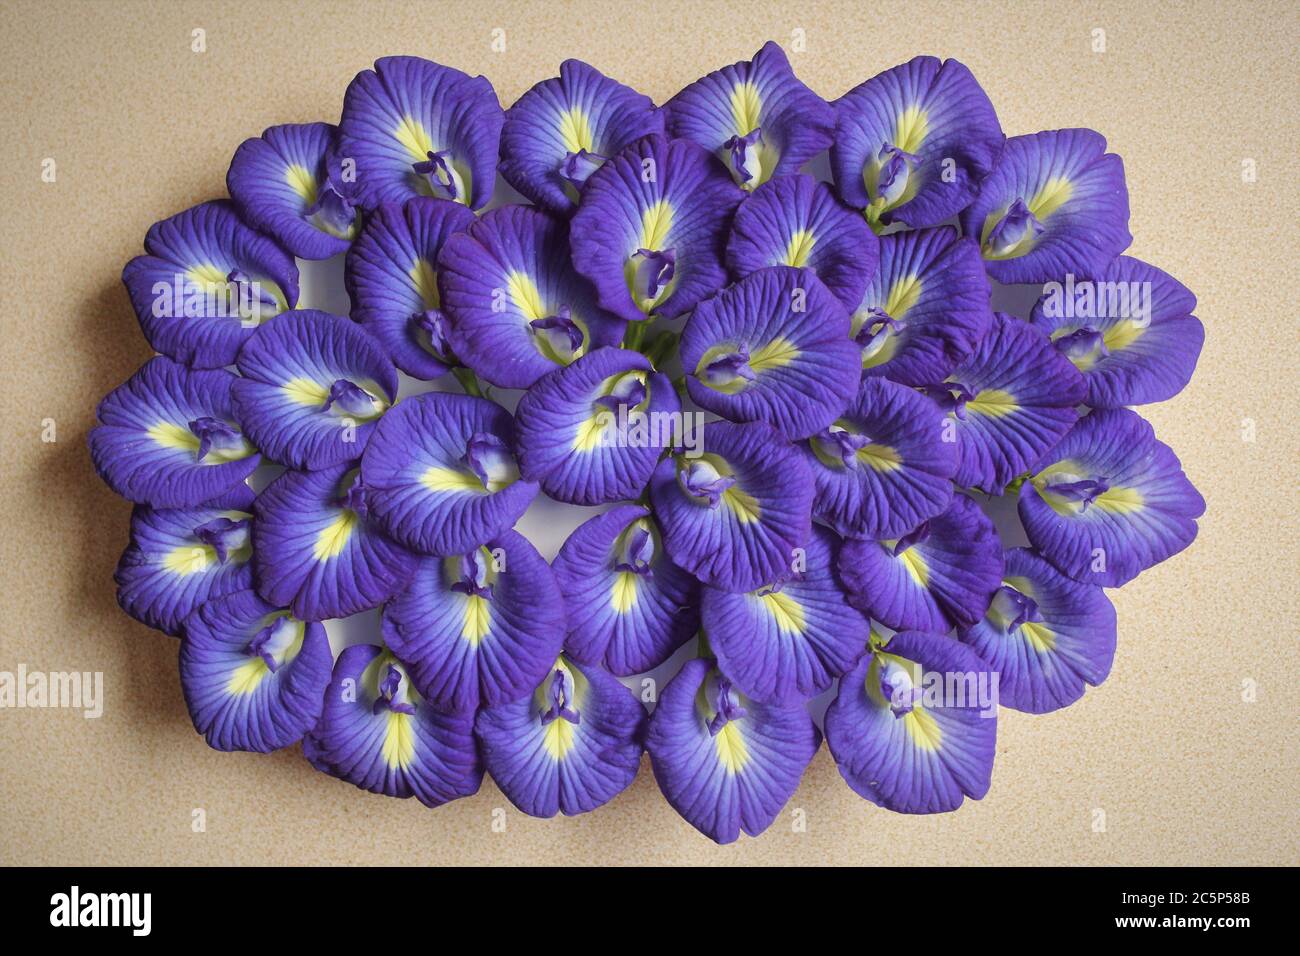 Butterfly pea flower or Clitoria ternatea flowers photo isolate on cream color top view Stock Photo